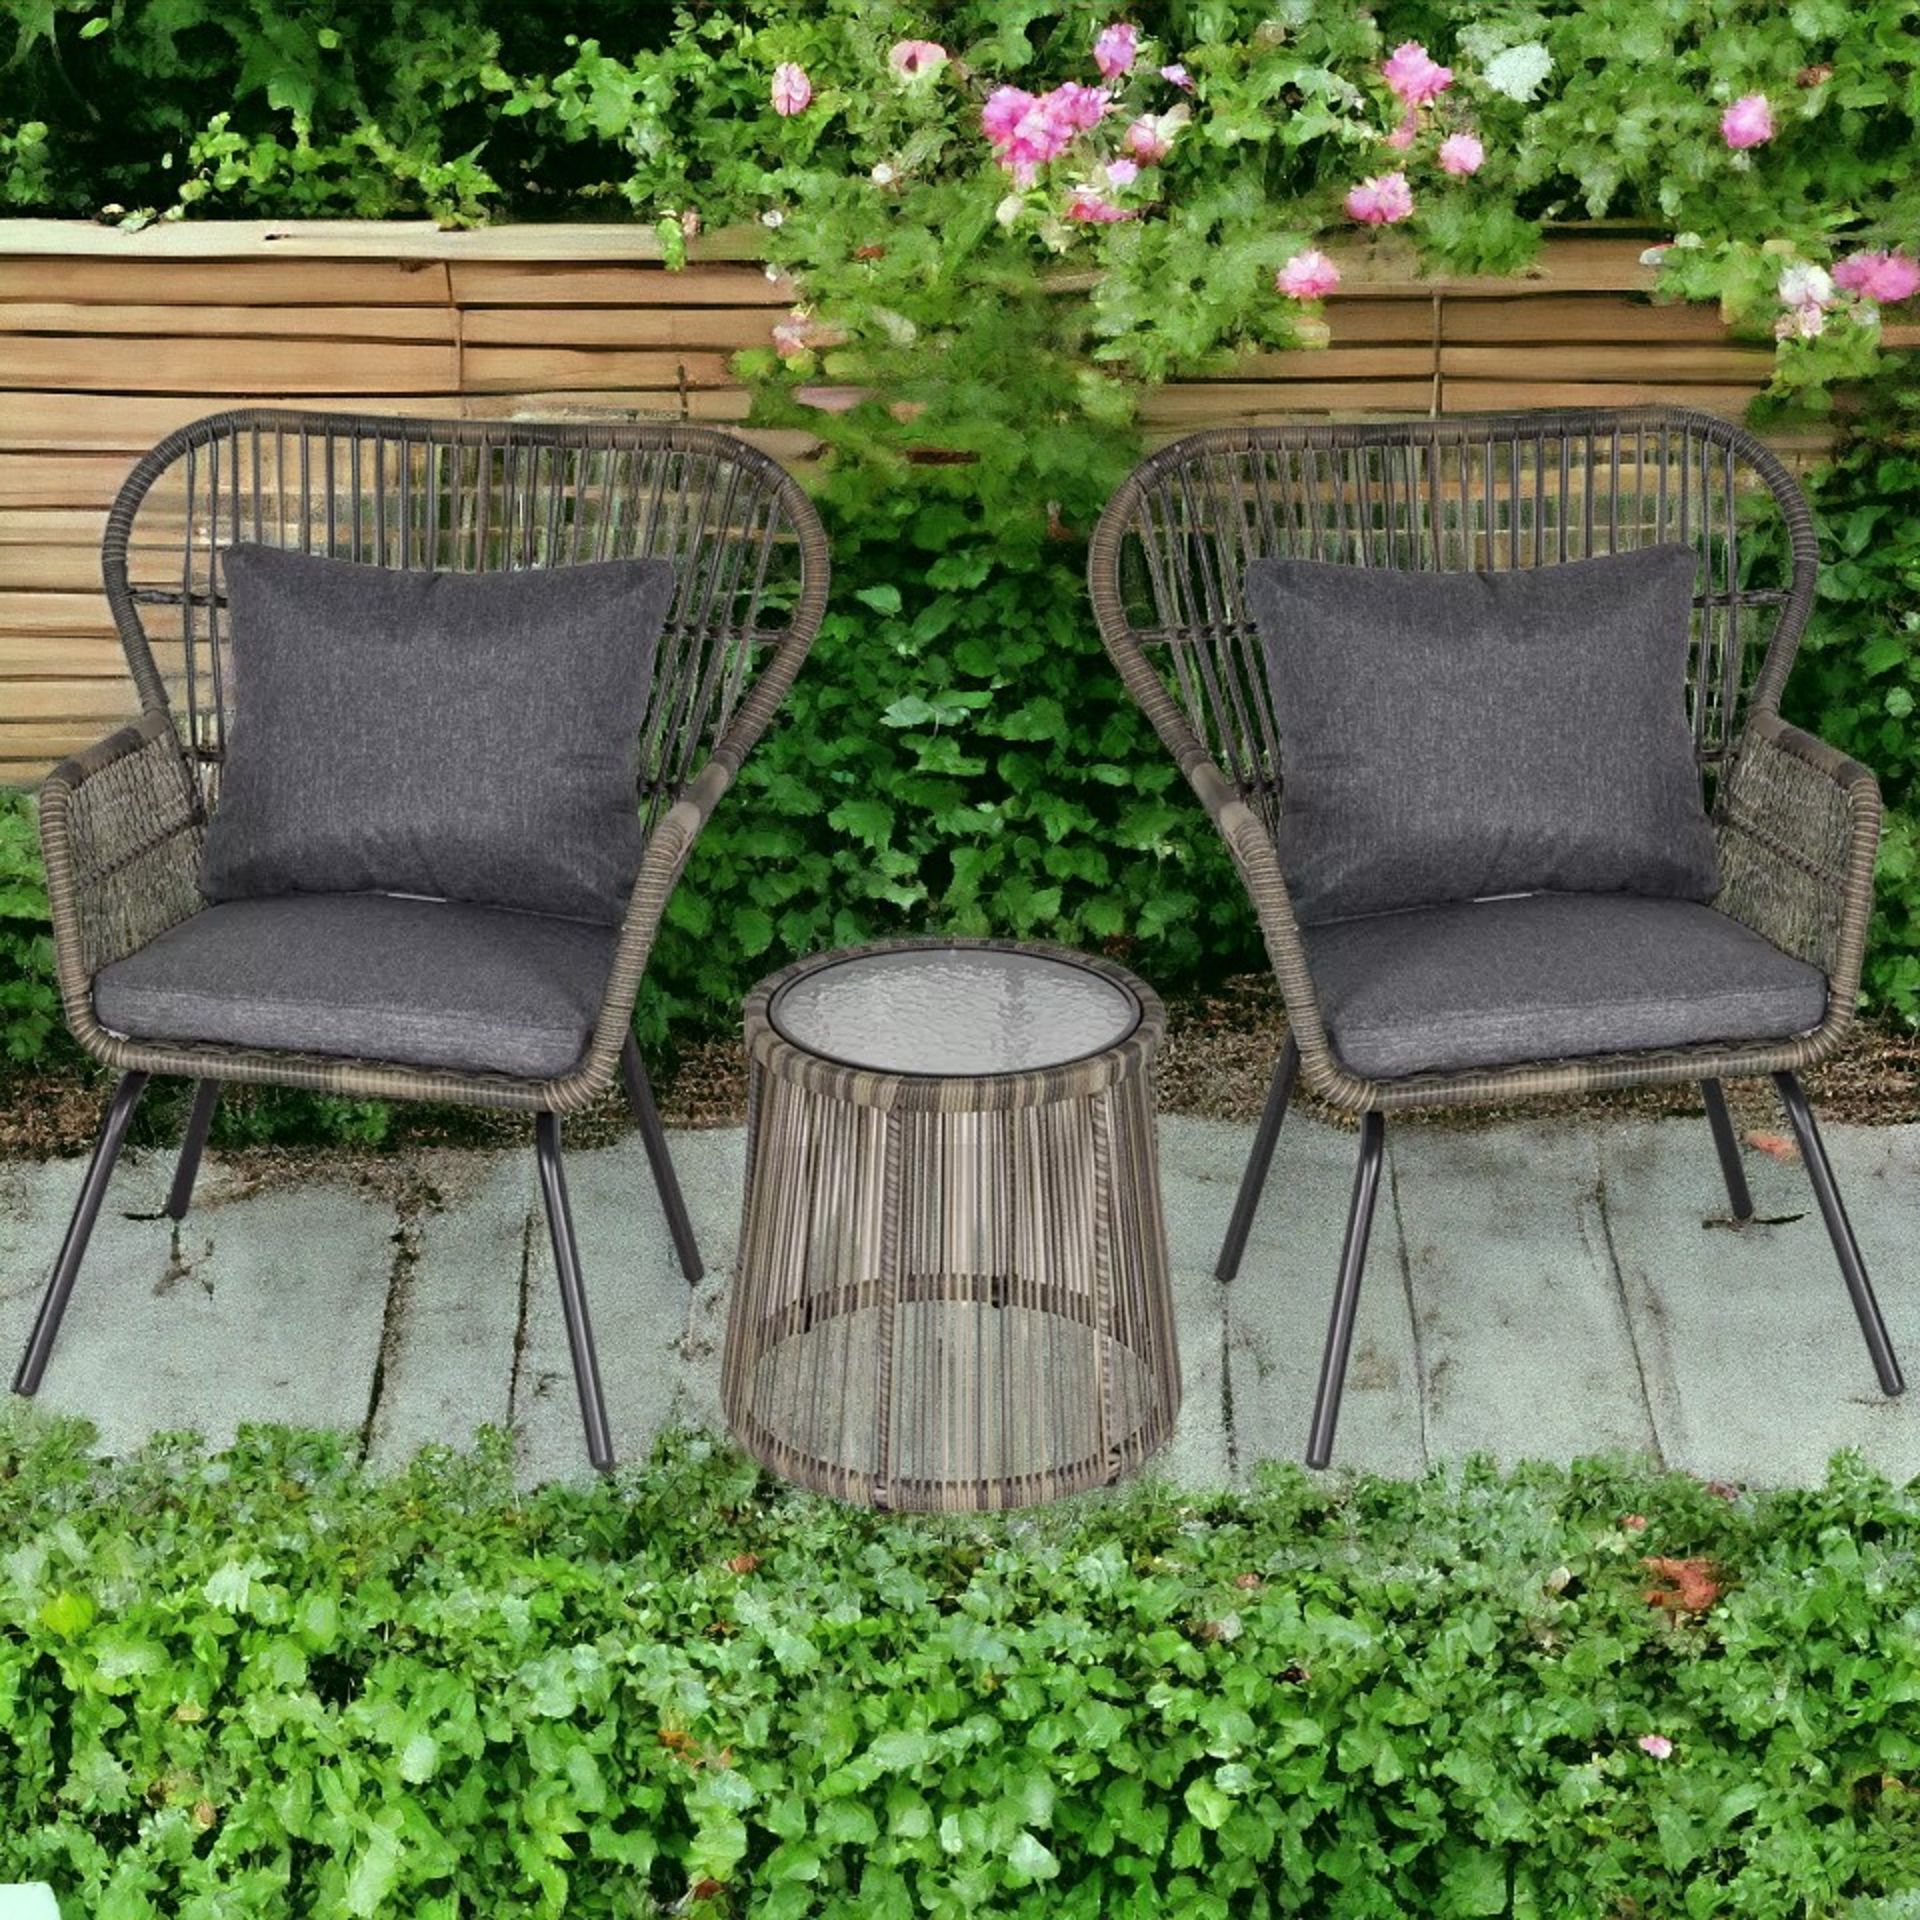 FREE DELIVERY- BRAND NEW 3 PCS WEBBED PE RATTAN OUTDOOR PATIO SET W/ CUSHIONS STEEL FRAME GREY - Image 2 of 2